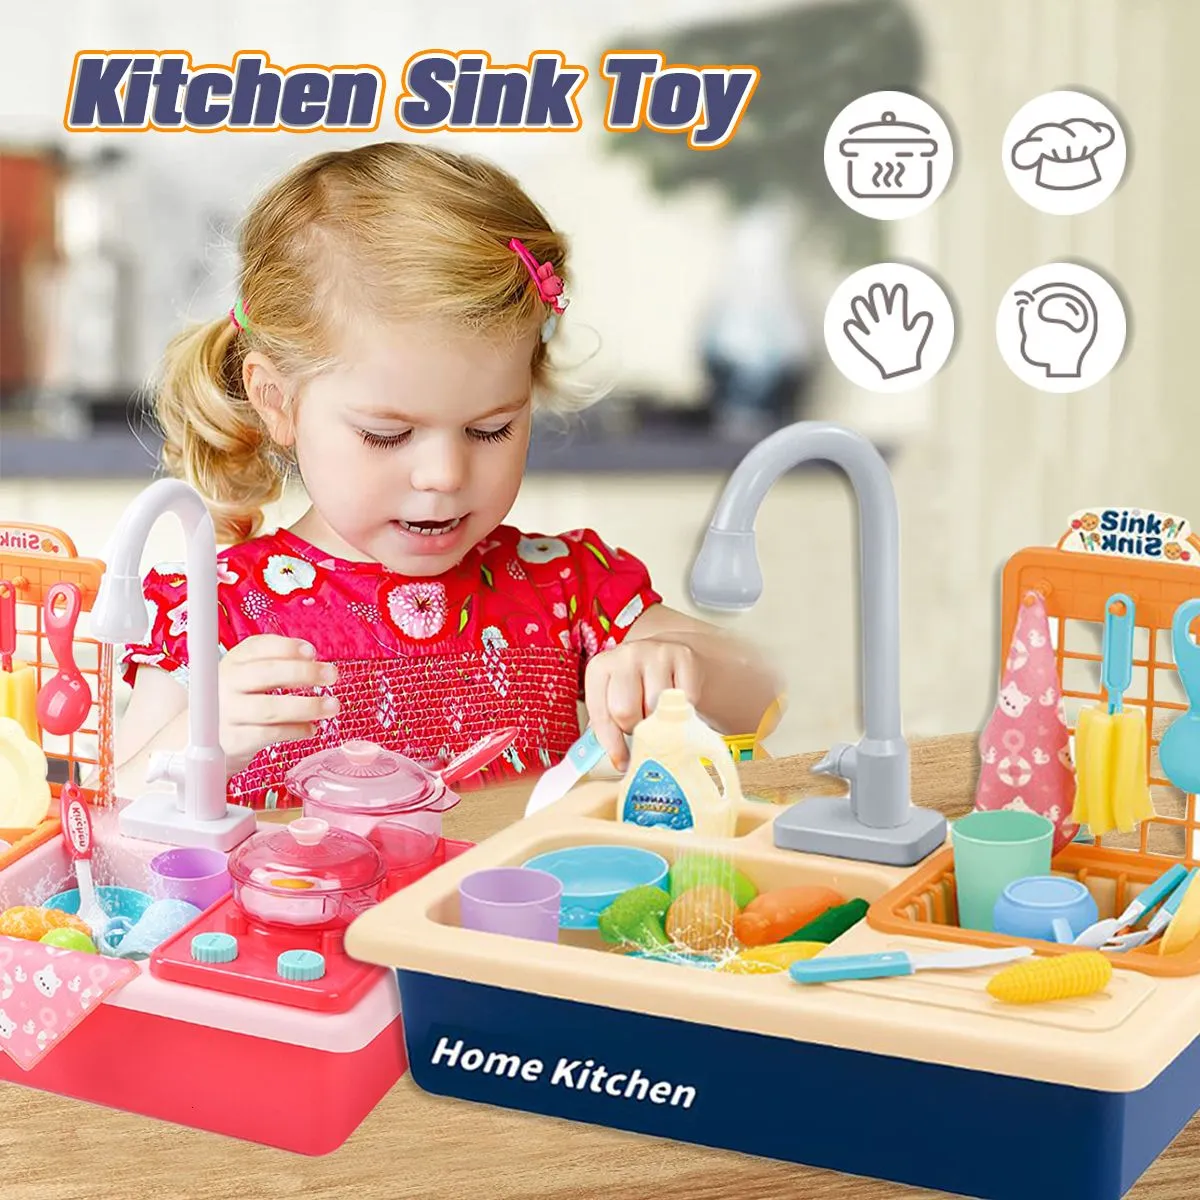 Kitchens Play Food Kids Pretend Kitchen Sink Toys With Cooking Stove Pot Pan Cutting Utensils Tableware Accessories Girls 230925